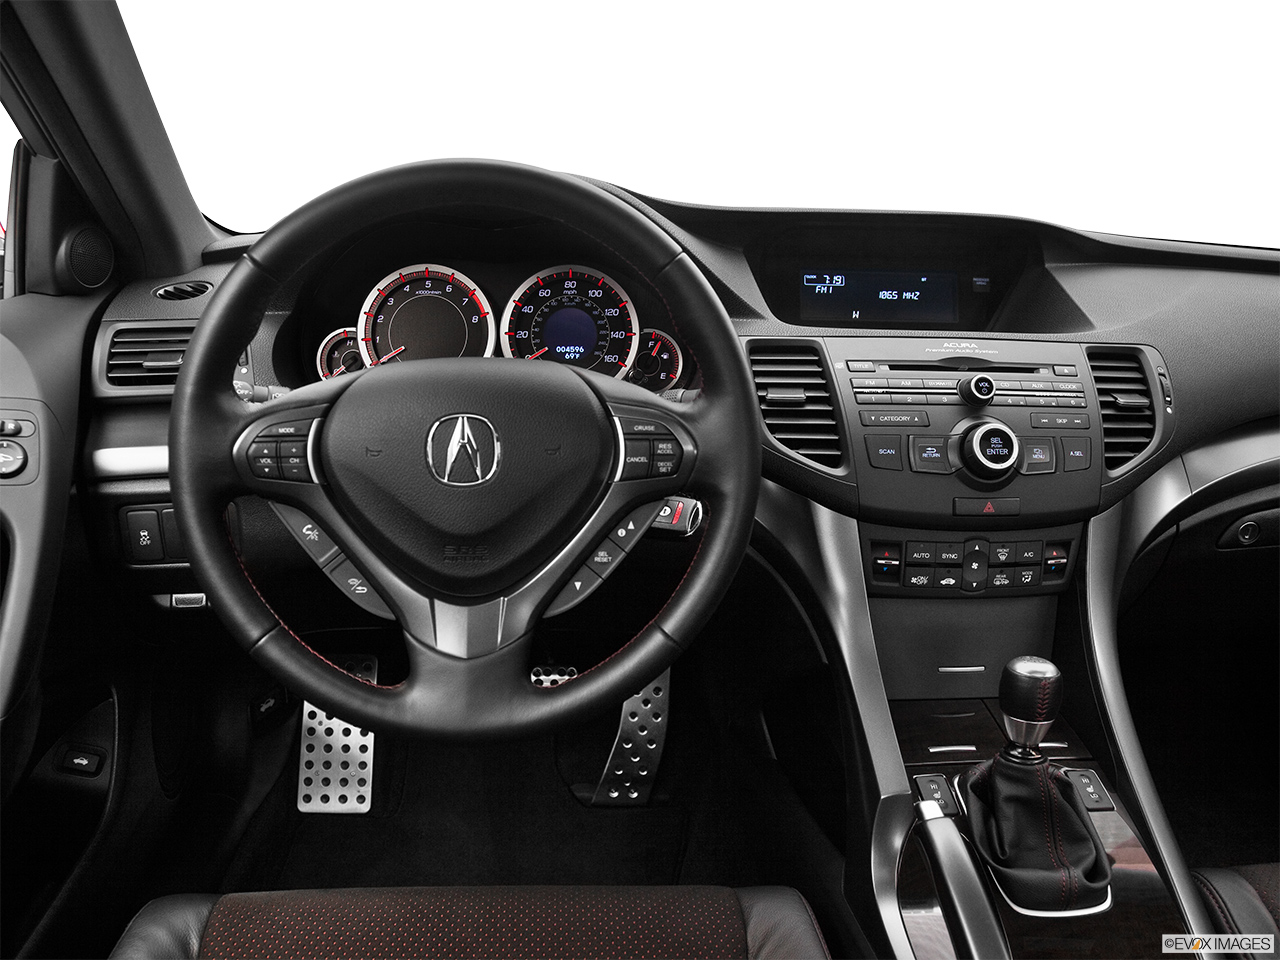 2012 Acura TSX Special Edition 6-Speed Manual Steering wheel/Center Console. 